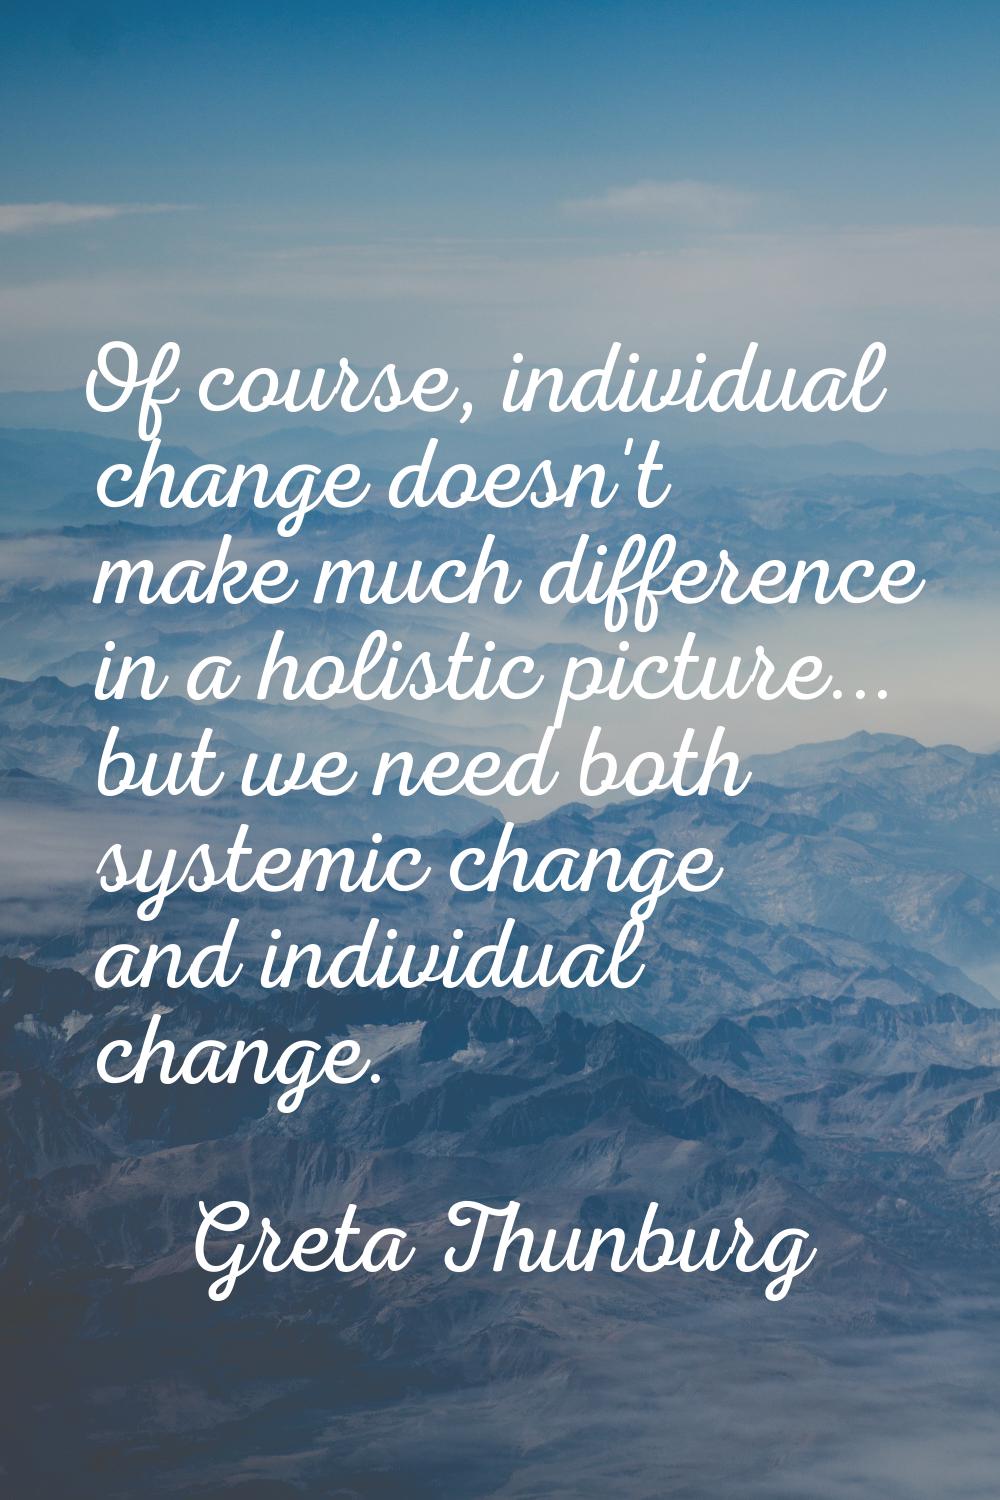 Of course, individual change doesn't make much difference in a holistic picture... but we need both